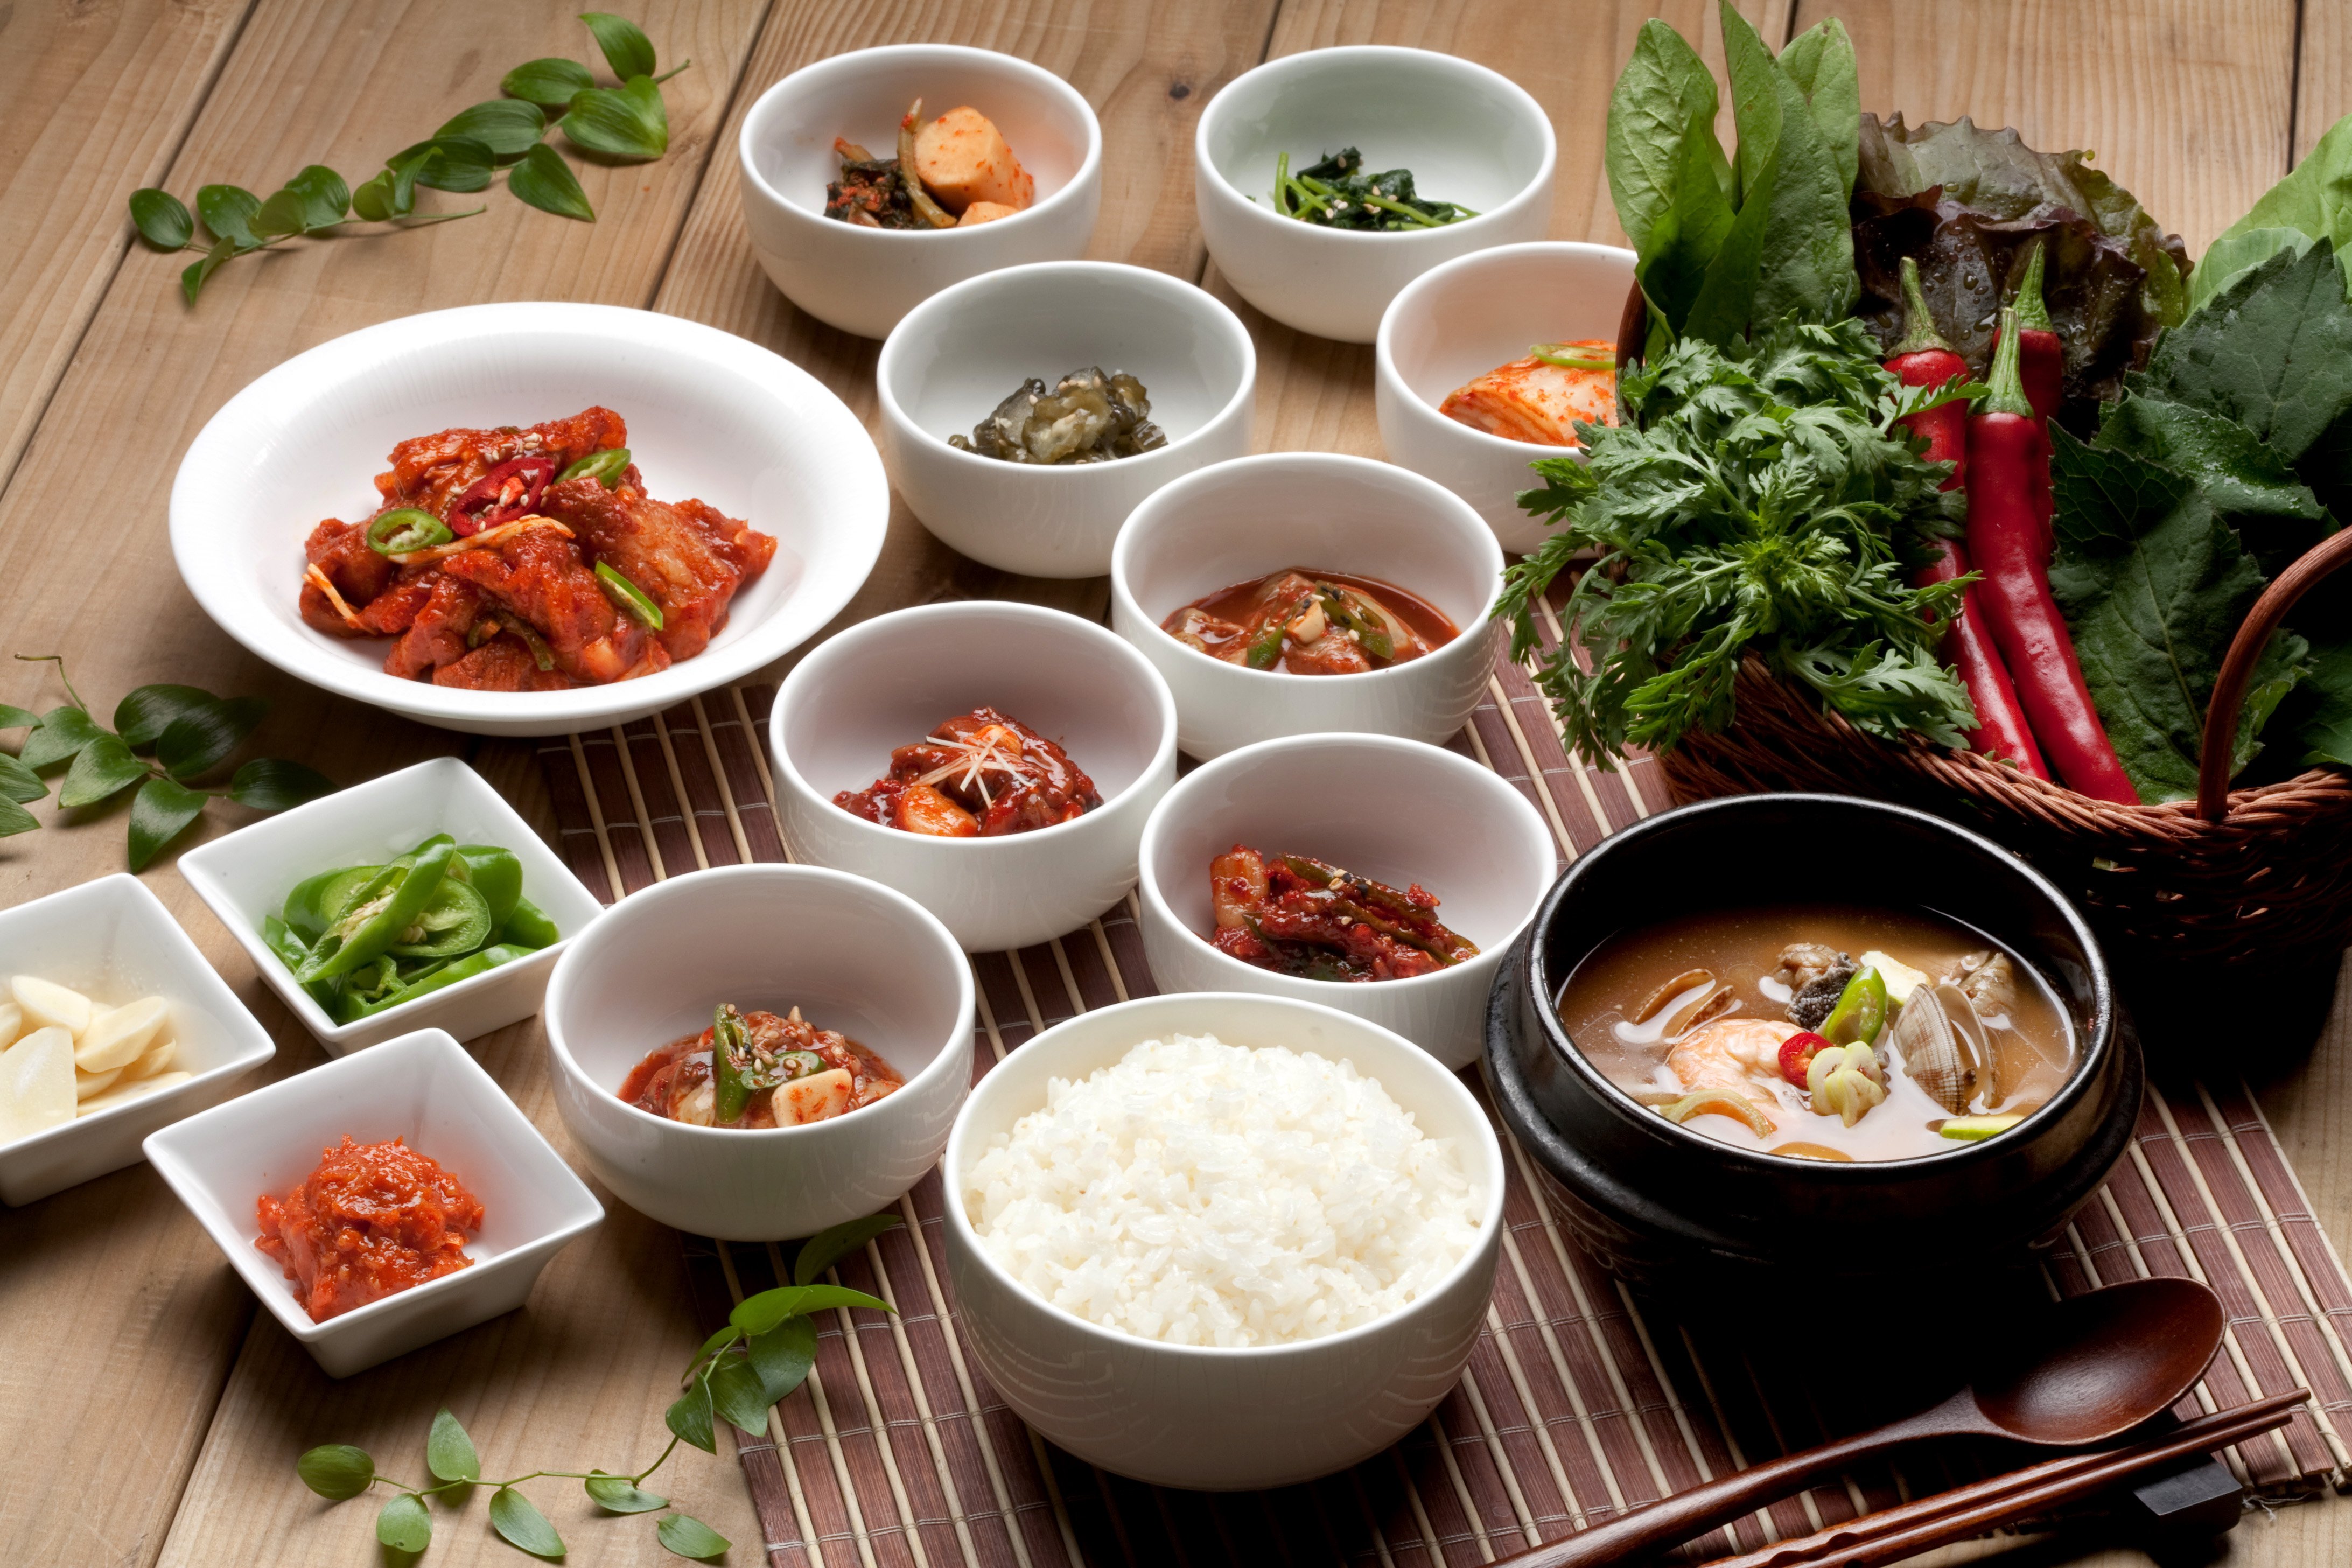 Image of Korean foods on a table